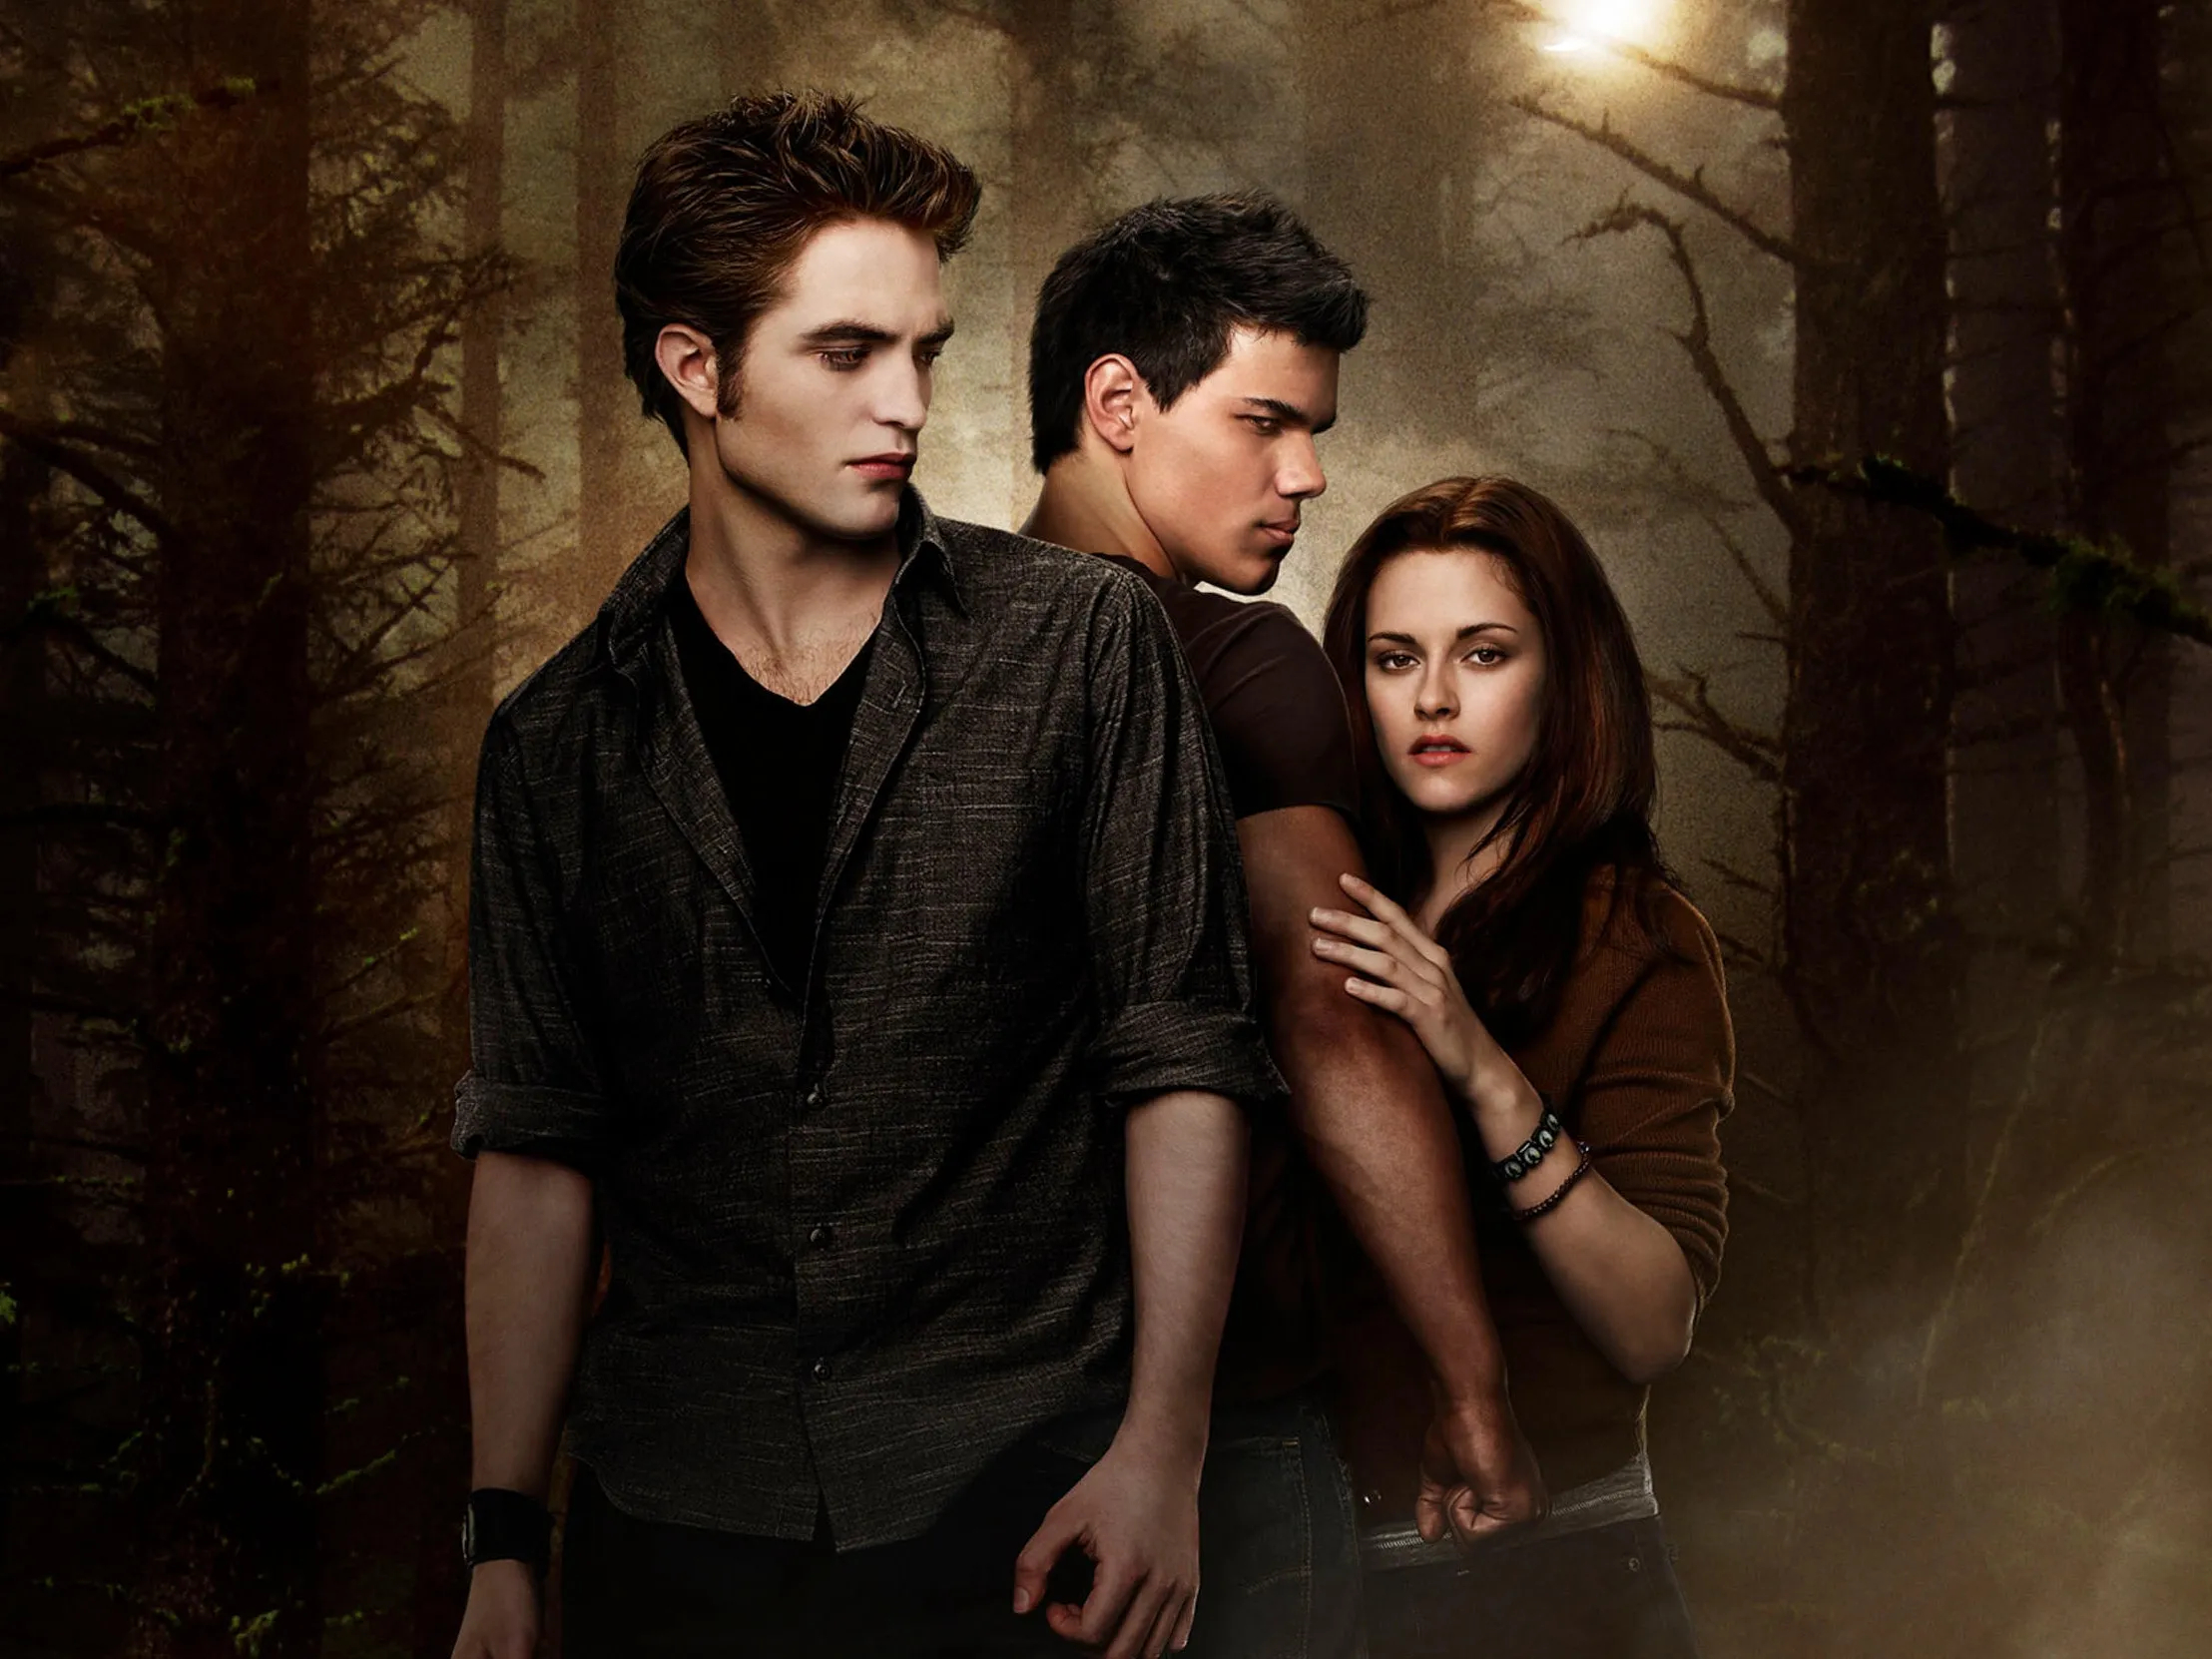 2216x1662 55 Thoughts I Had While Rewatching 'The Twilight Saga: New Moon' | Vogue